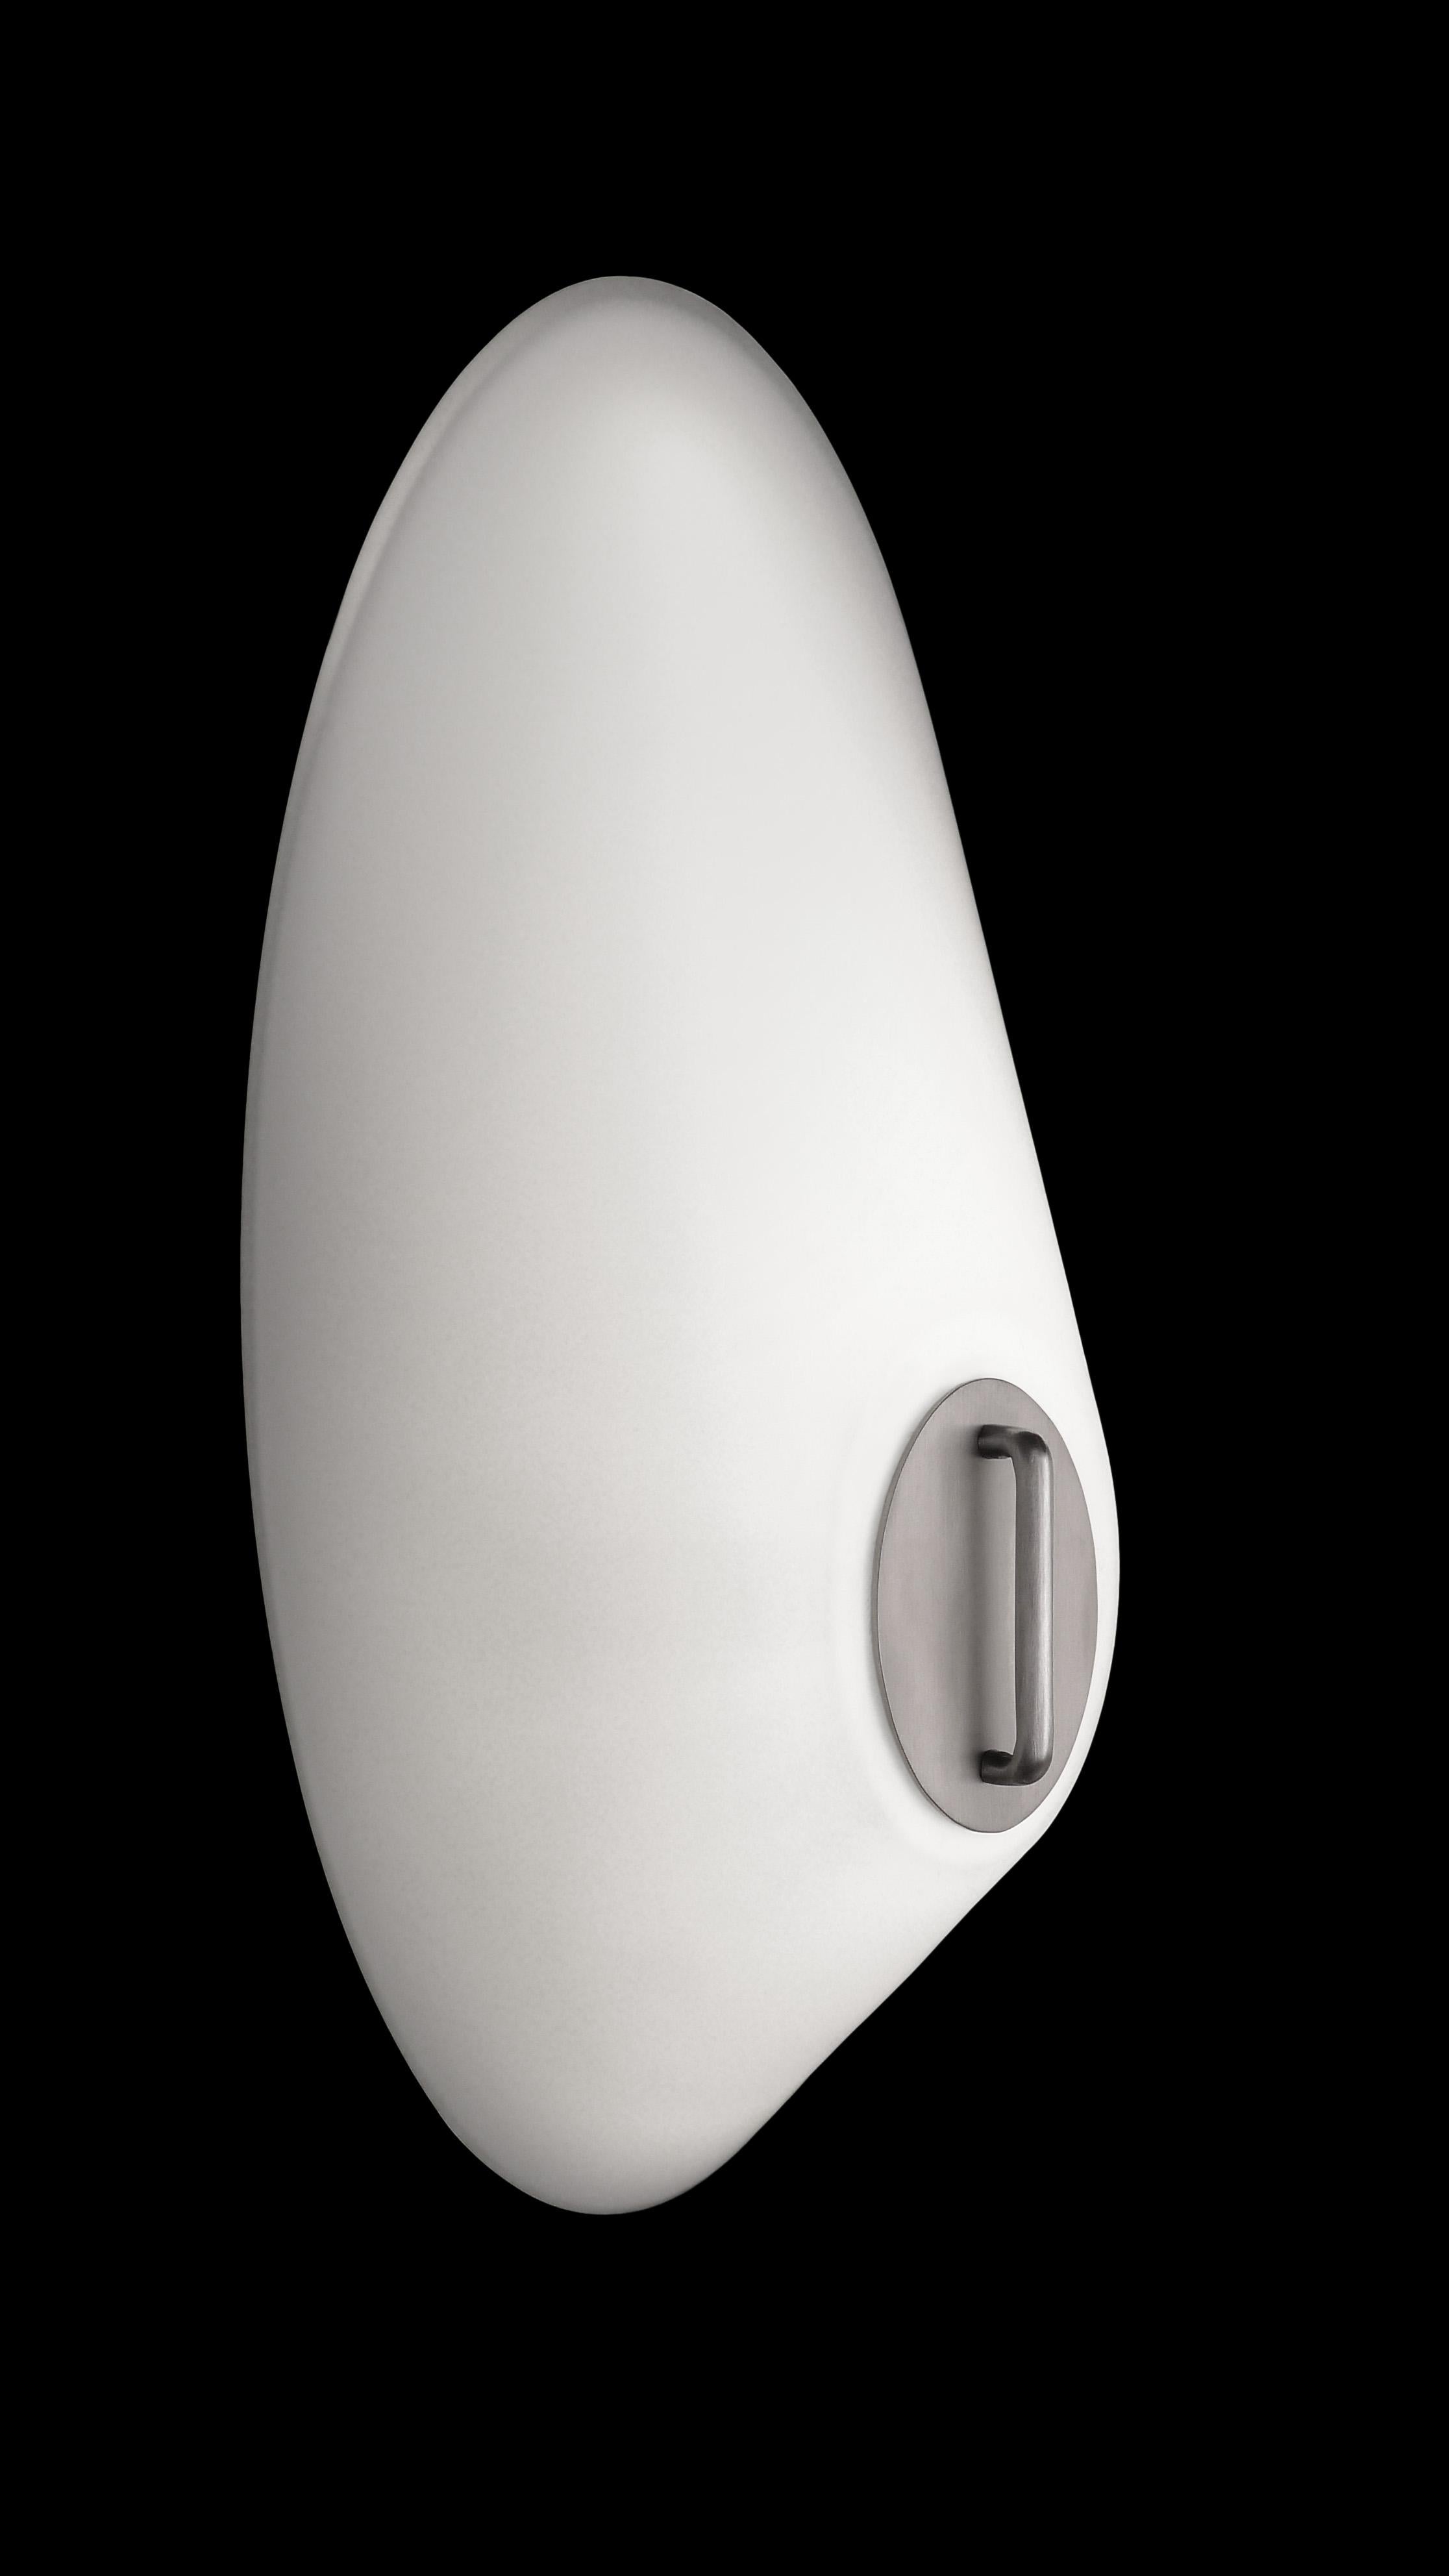 Oval shaped glass sconce. In the manner of Streamline Moderne. Brushed aluminum oval detail at center. LED Lamped, 3000k standard color temperature. Great for use in pairs.

Architect, Sandy Littman of Duesenberg LTD. and the American Glass Light